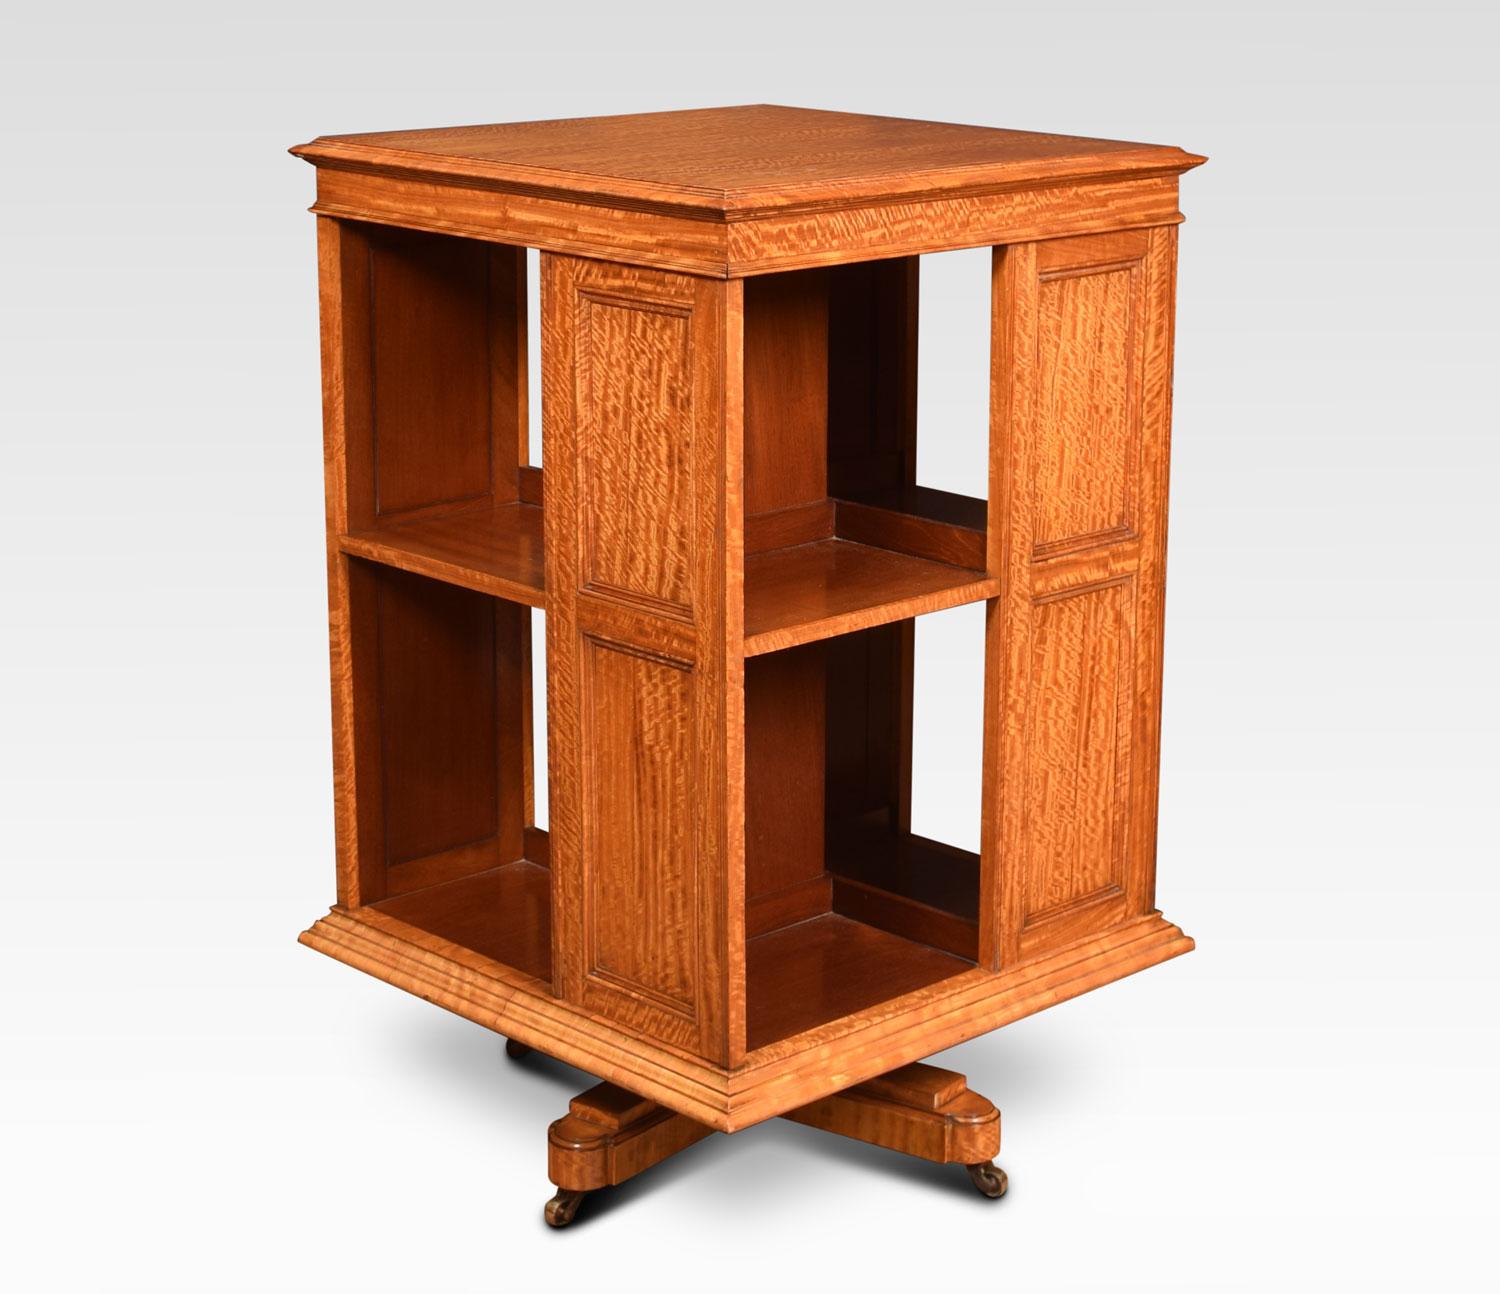 Satinwood revolving bookcase with moulded square top above two-tier panelled dividers. All raised up on cruciform base and brass castors.
Dimensions:
Height 35.5 inches
Width 22.5 inches
Depth 22.5 inches.